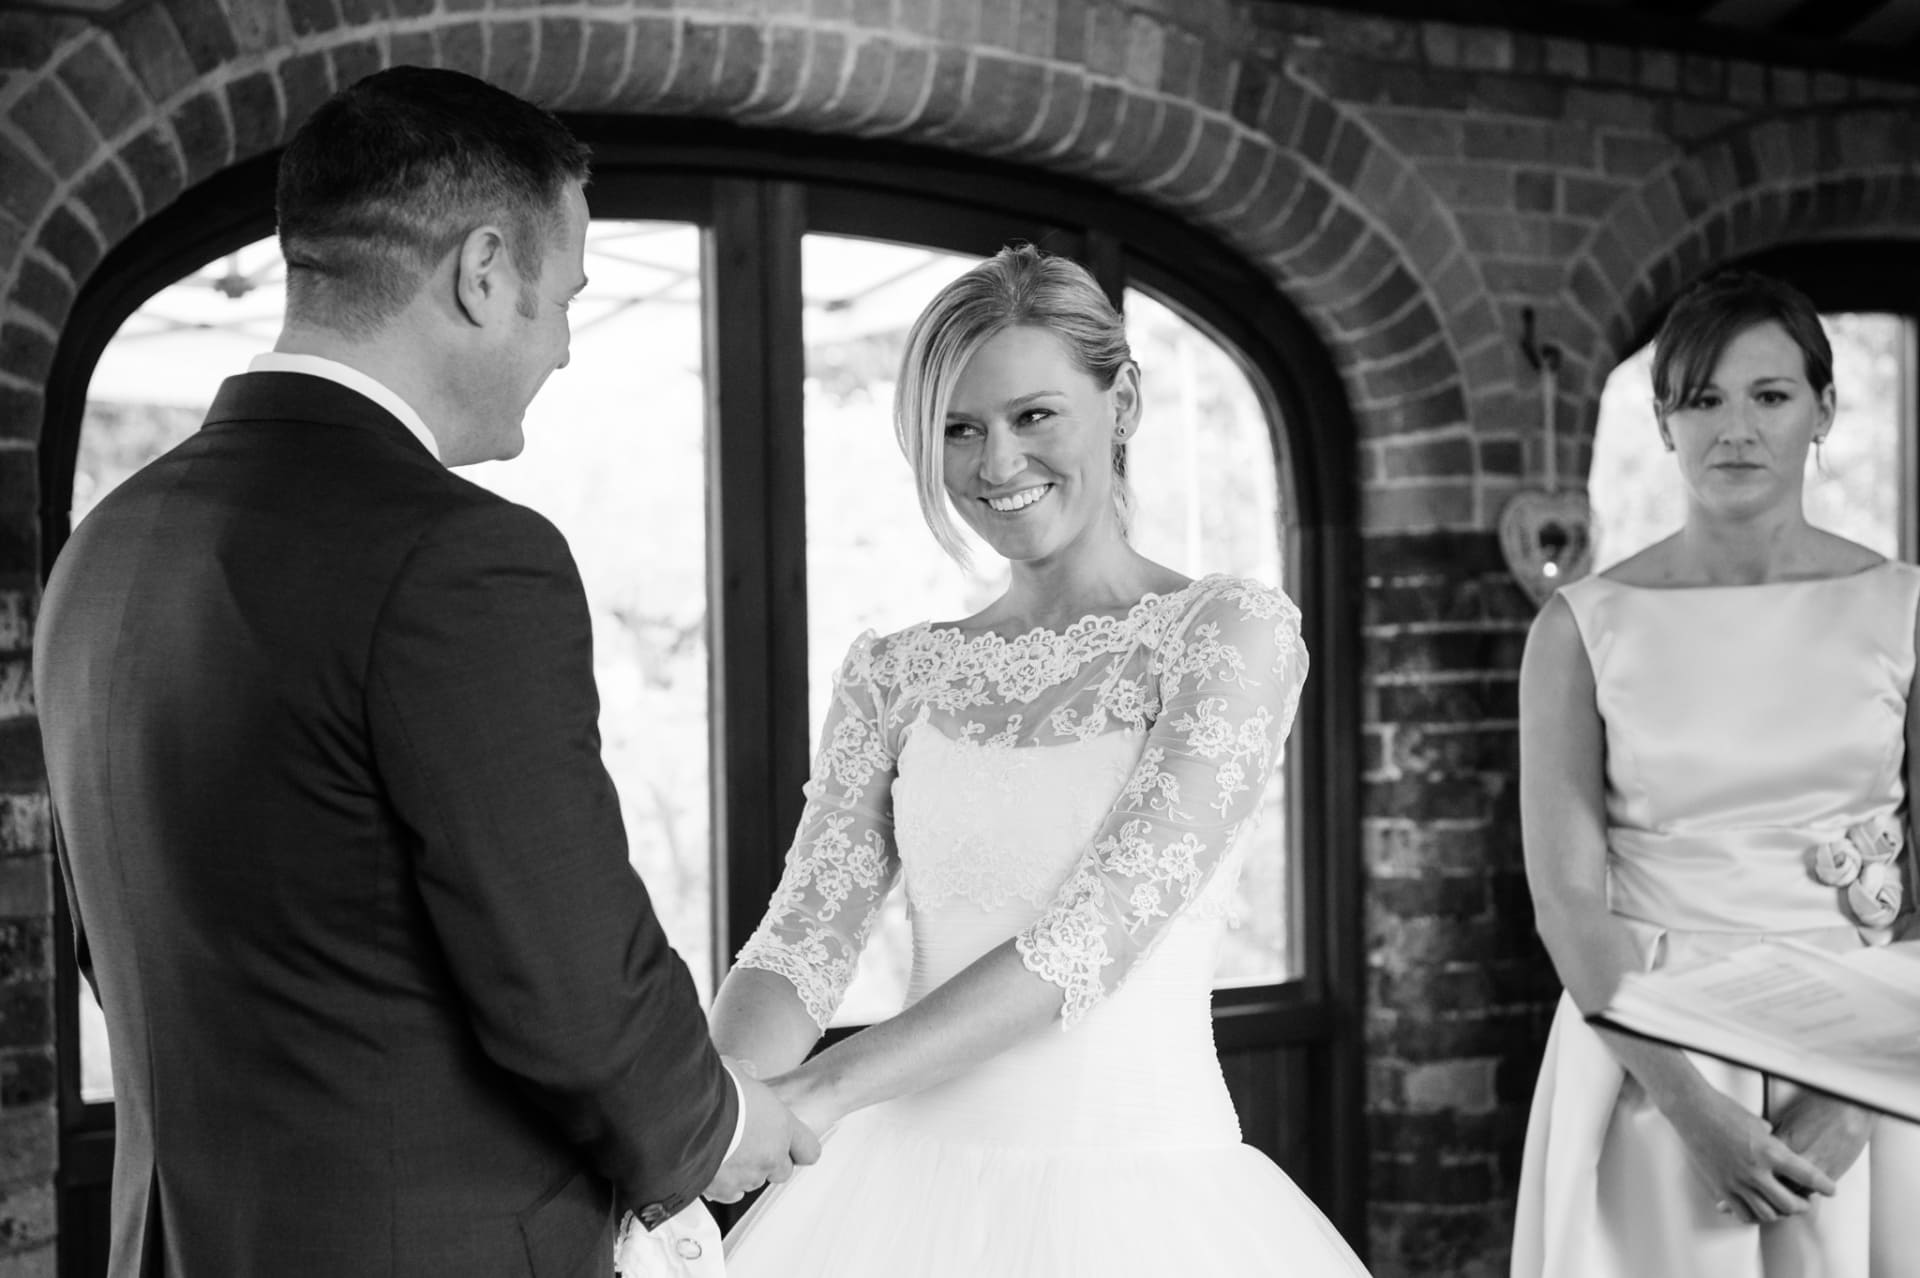 Bride smiling at the groom during a wedding ceremony at Dodmoor House